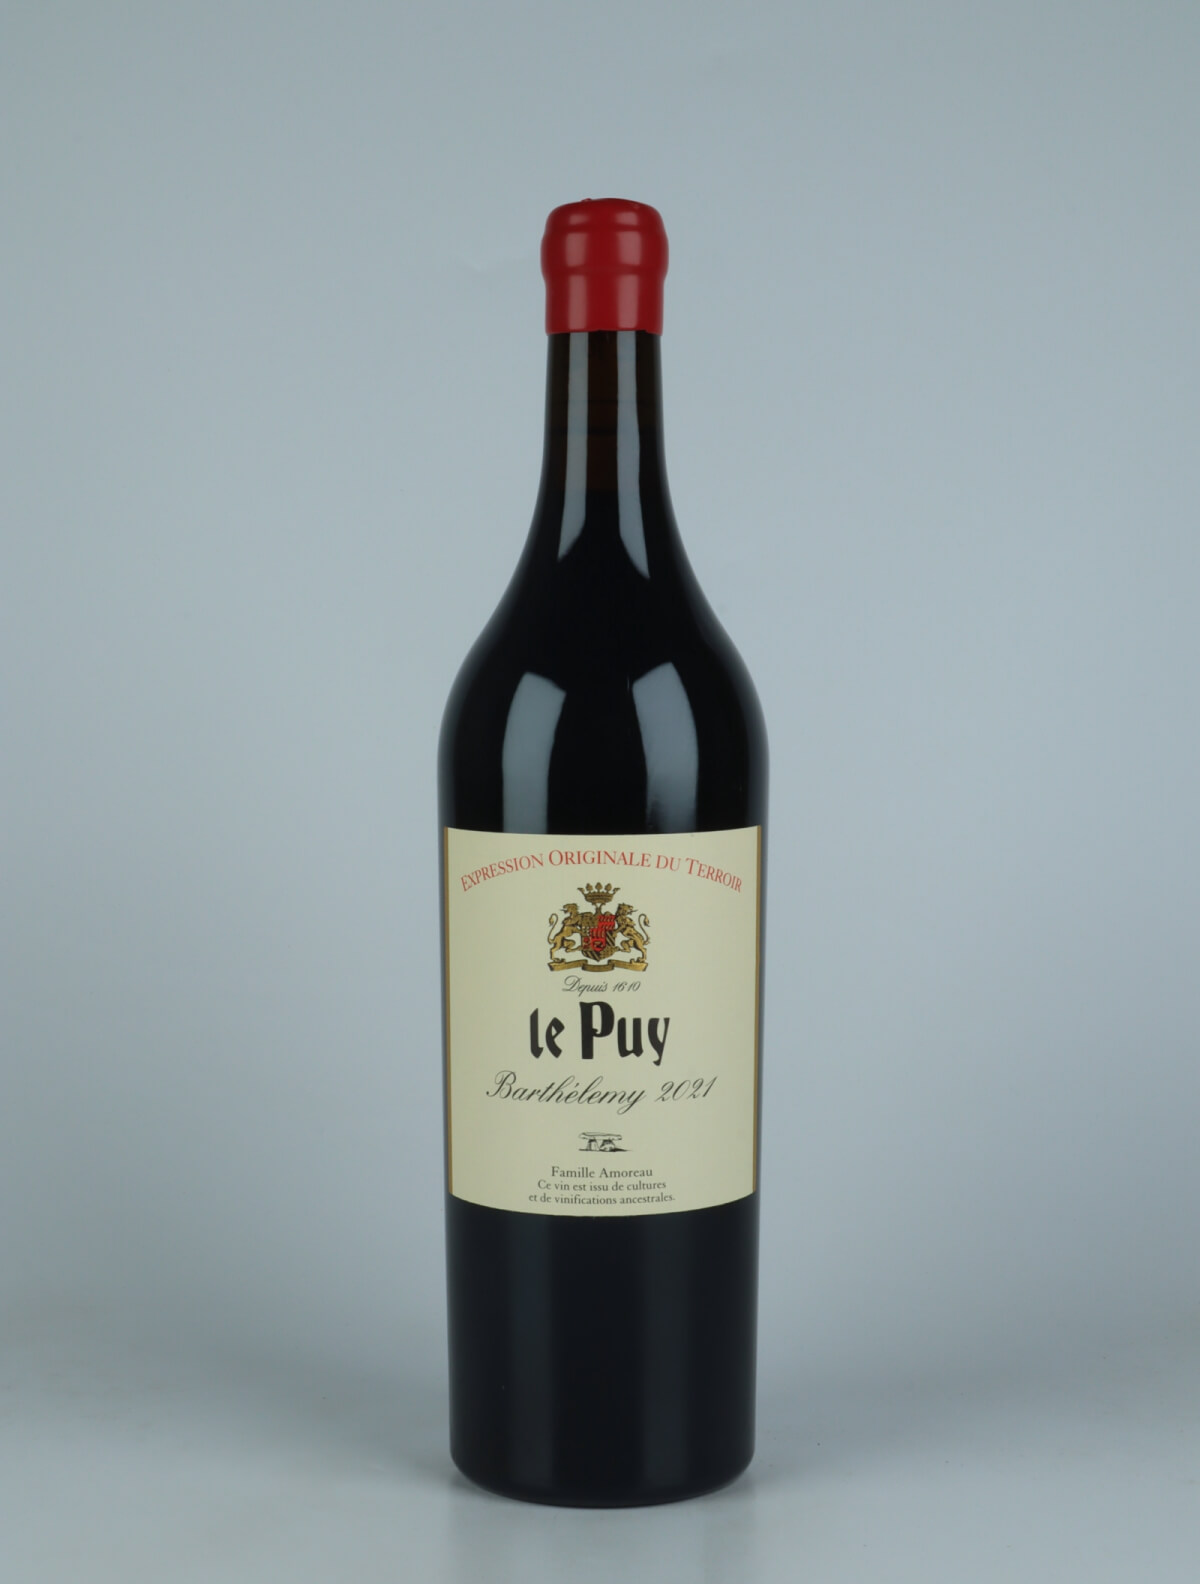 A bottle 2021 Barthélemy Red wine from Château le Puy, Bordeaux in France